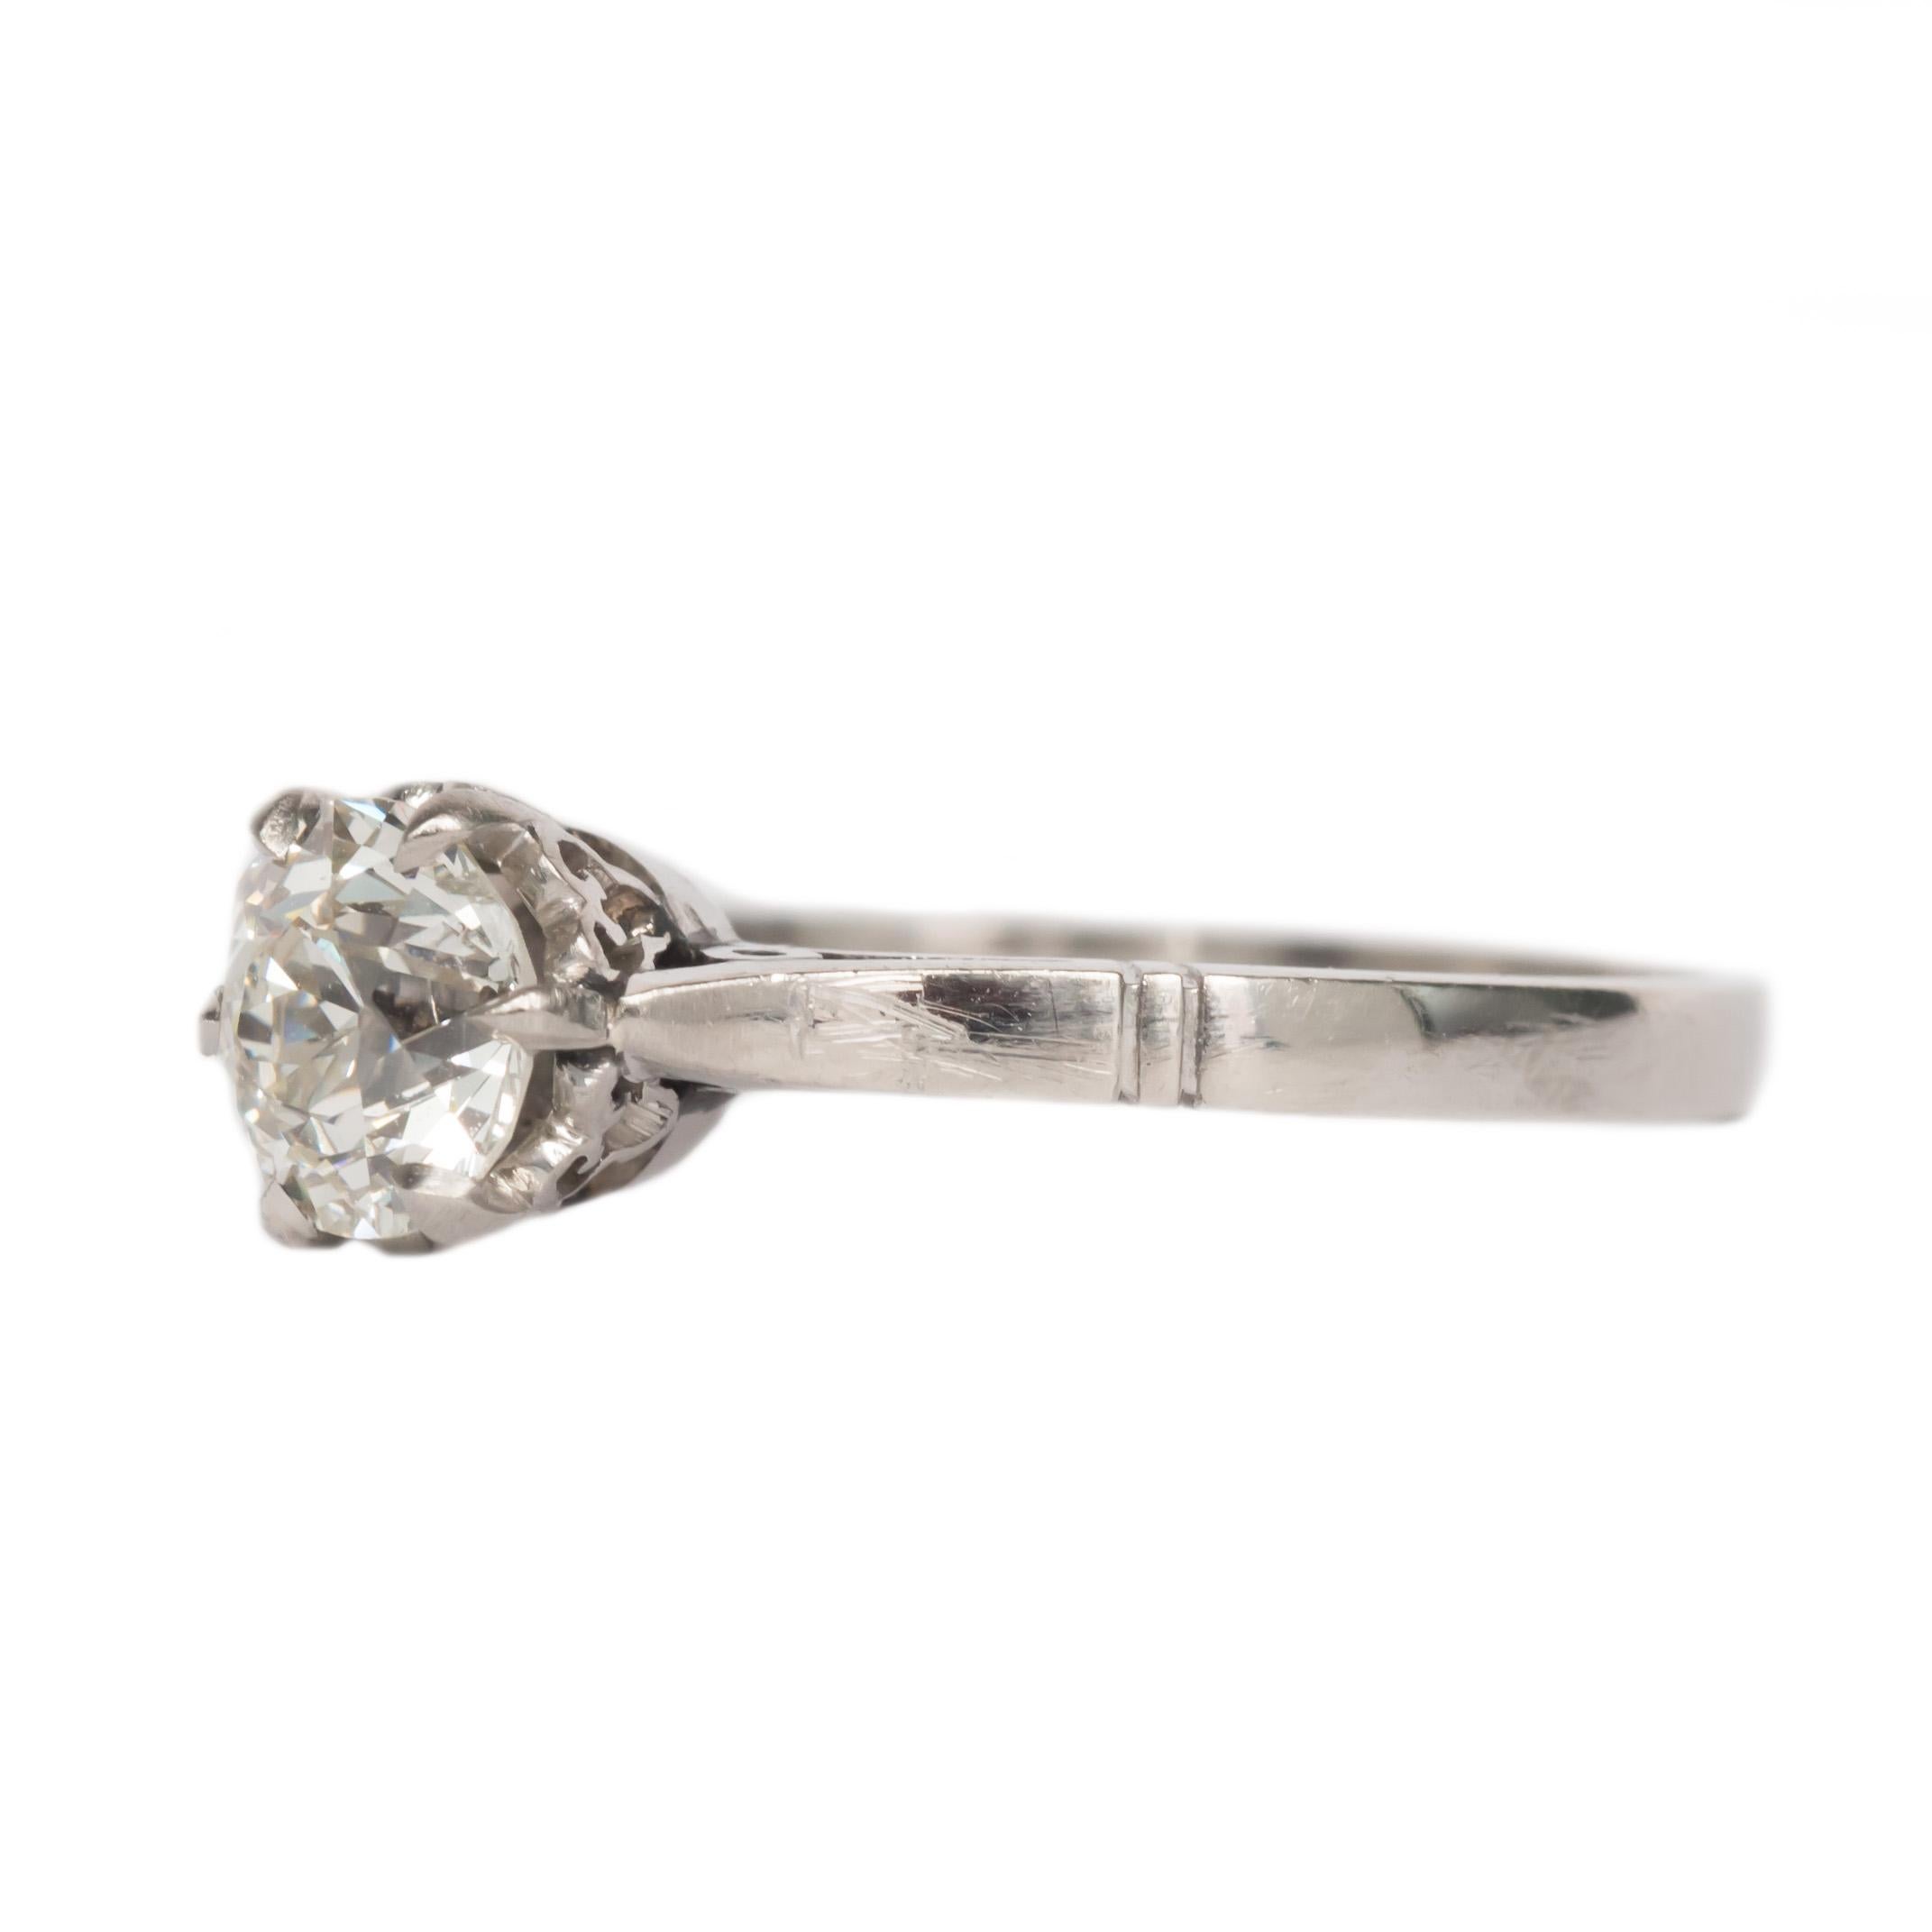 Item Details: 
Ring Size: 6.5
Metal Type: Platinum [Tested]
Weight: 3.3 grams

Center Diamond Details
Shape: Old European Brilliant
Carat Weight: .75 carat
Color: J
Clarity: VS1

Finger to Top of Stone Measurement: 6MM
Condition: Excellent